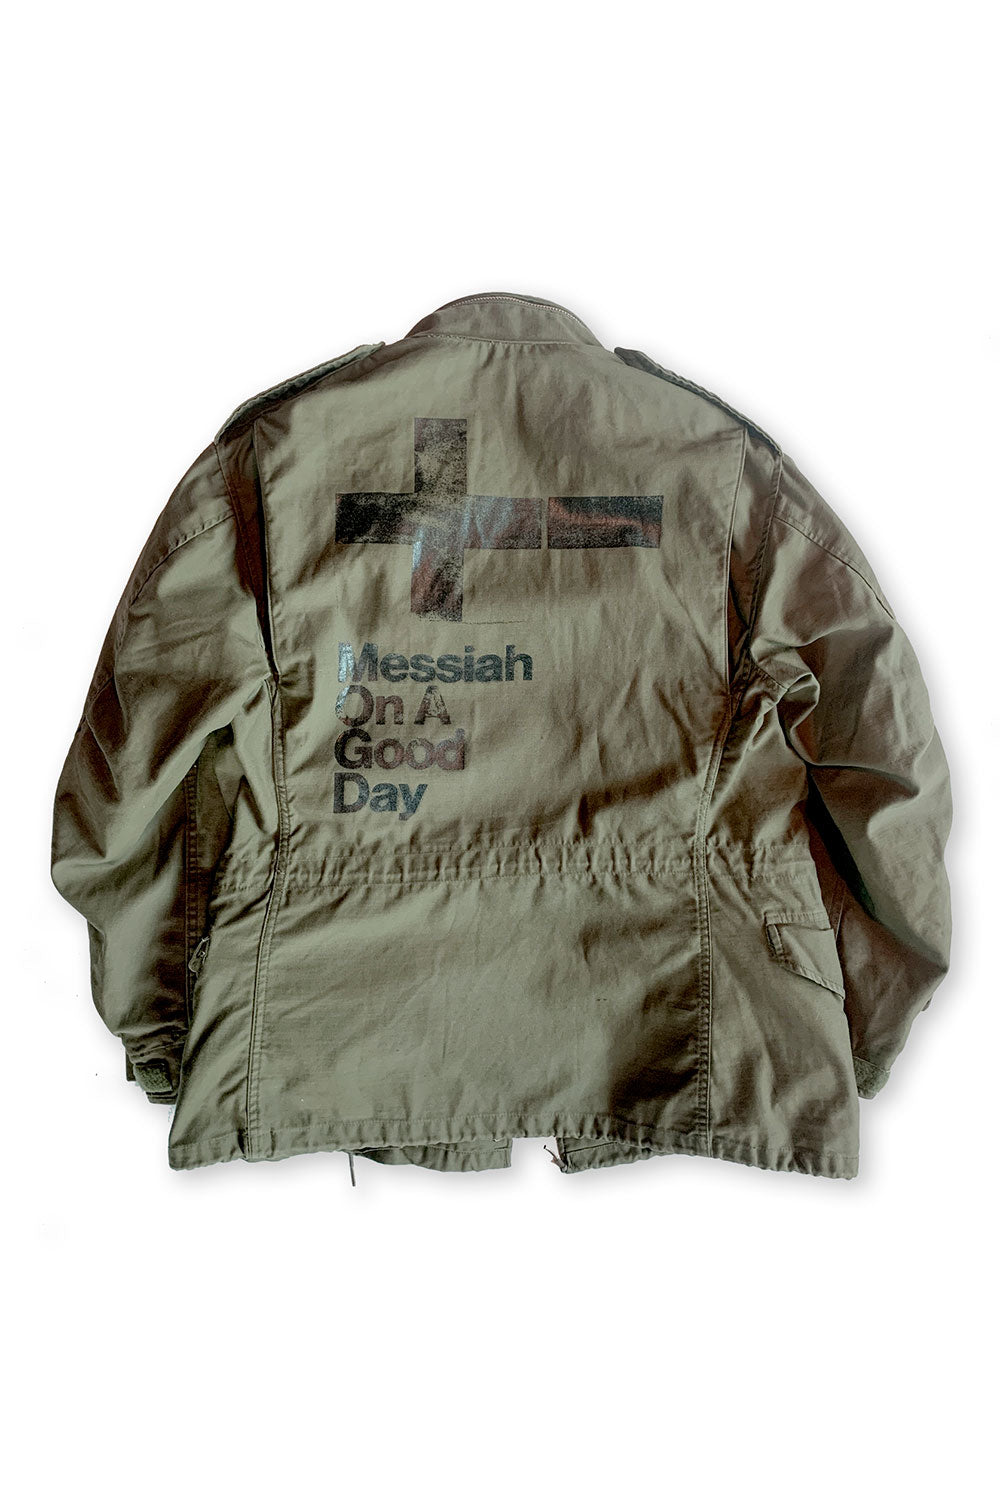 Messiah On A Good Day (MOAGD) ARMY JACKET